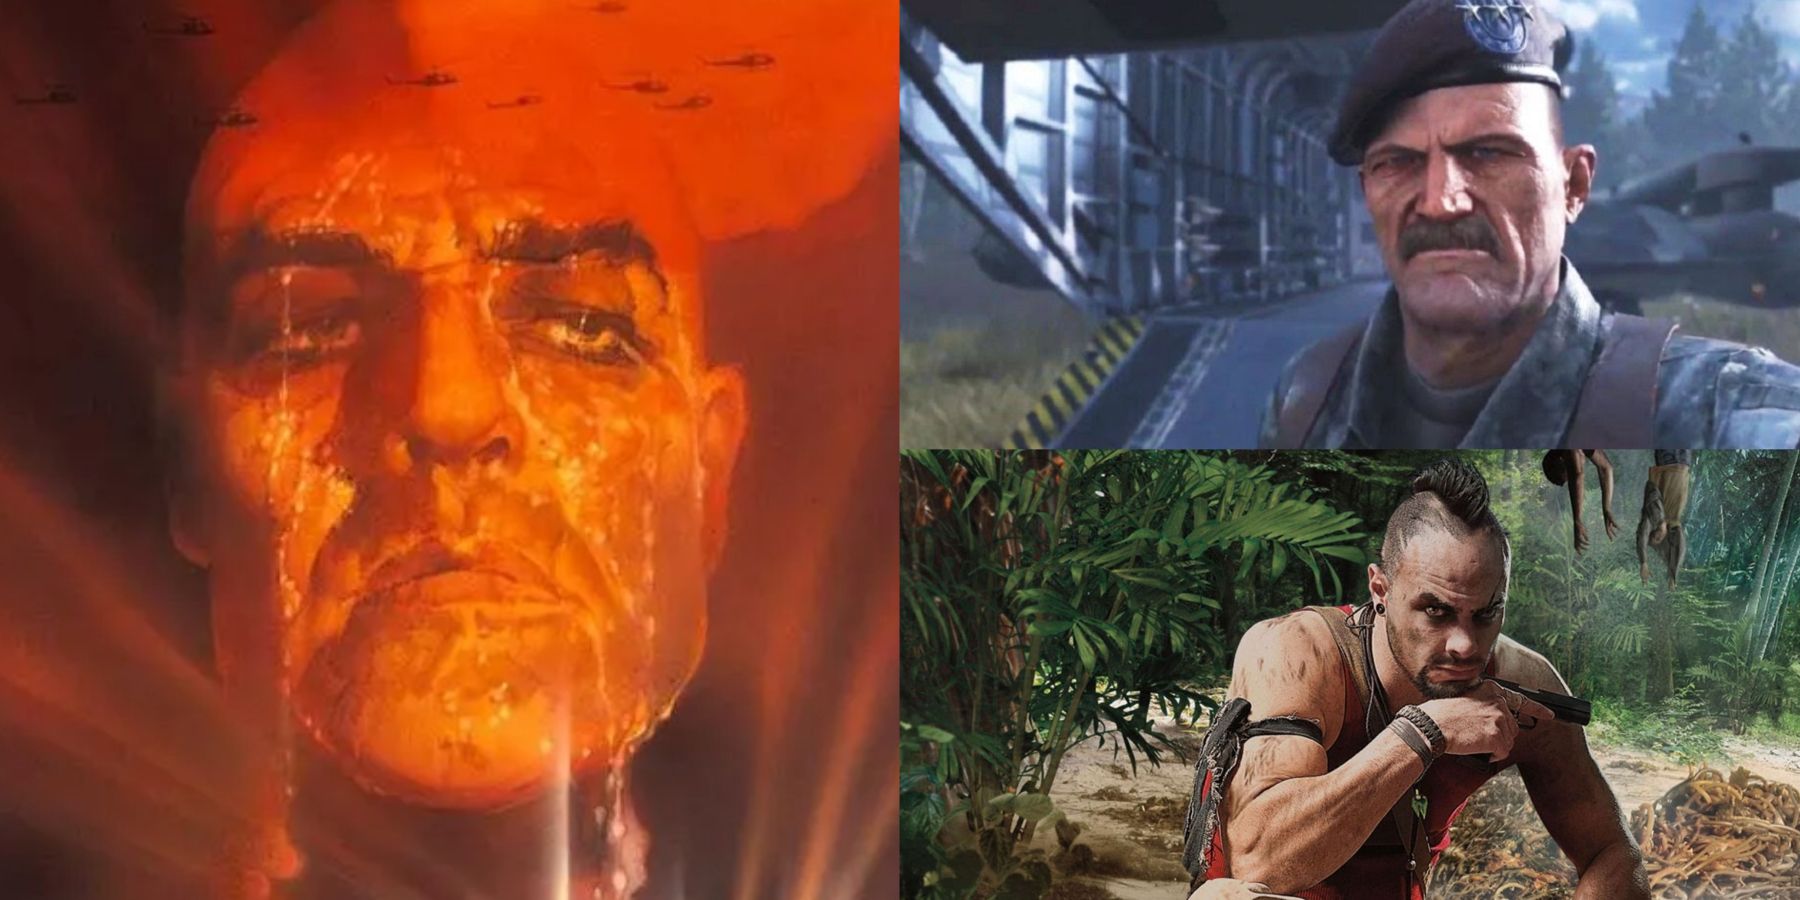 X Game Characters Inspired by Apocalypse Now Feature Image